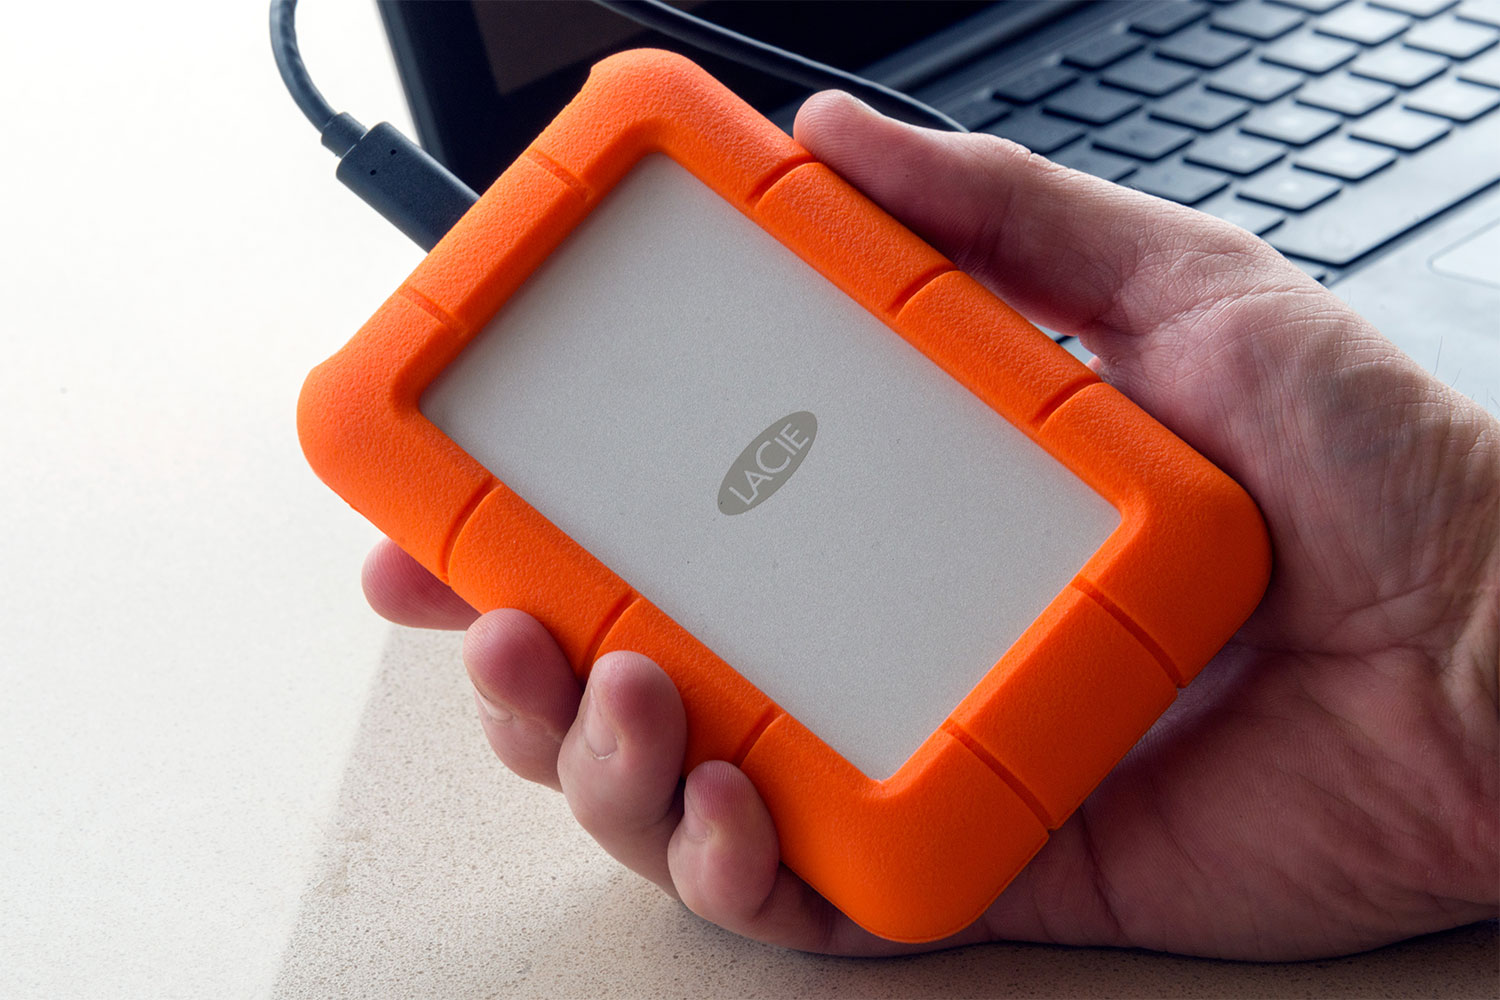 LaCie Rugged Mini Portable SSD Review 